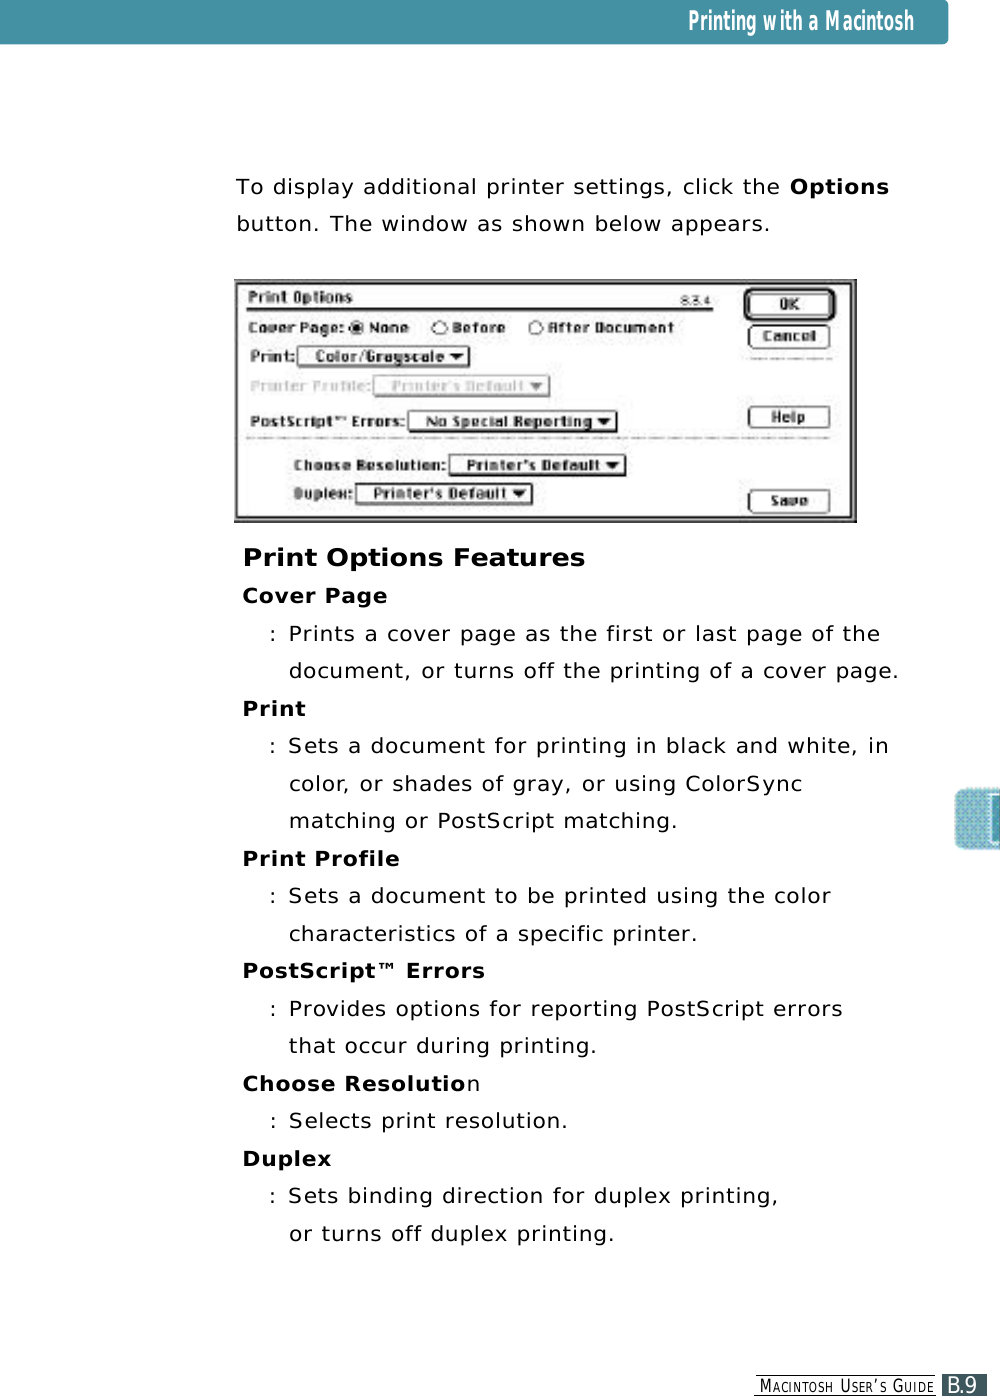 B.9MA C I N T O S H US E R ’SGU I D ETo display additional printer settings, click the O p t i o n sbutton. The window as shown below appears.Print Options FeaturesCover Page: Prints a cover page as the first or last page of thedocument, or turns off the printing of a cover page.P r i n t: Sets a document for printing in black and white, inc o l o r, or shades of gray, or using ColorSy n cmatching or PostScript matching.Print Profile: Sets a document to be printed using the colorc h a racteristics of a specific printer.PostScript™ Errors: P r ovides options for reporting PostScript errors that occur during printing.Choose Resolution: Selects print resolution.D u p l e x: Sets binding direction for duplex printing, or turns off duplex printing.Printing with a Macintosh